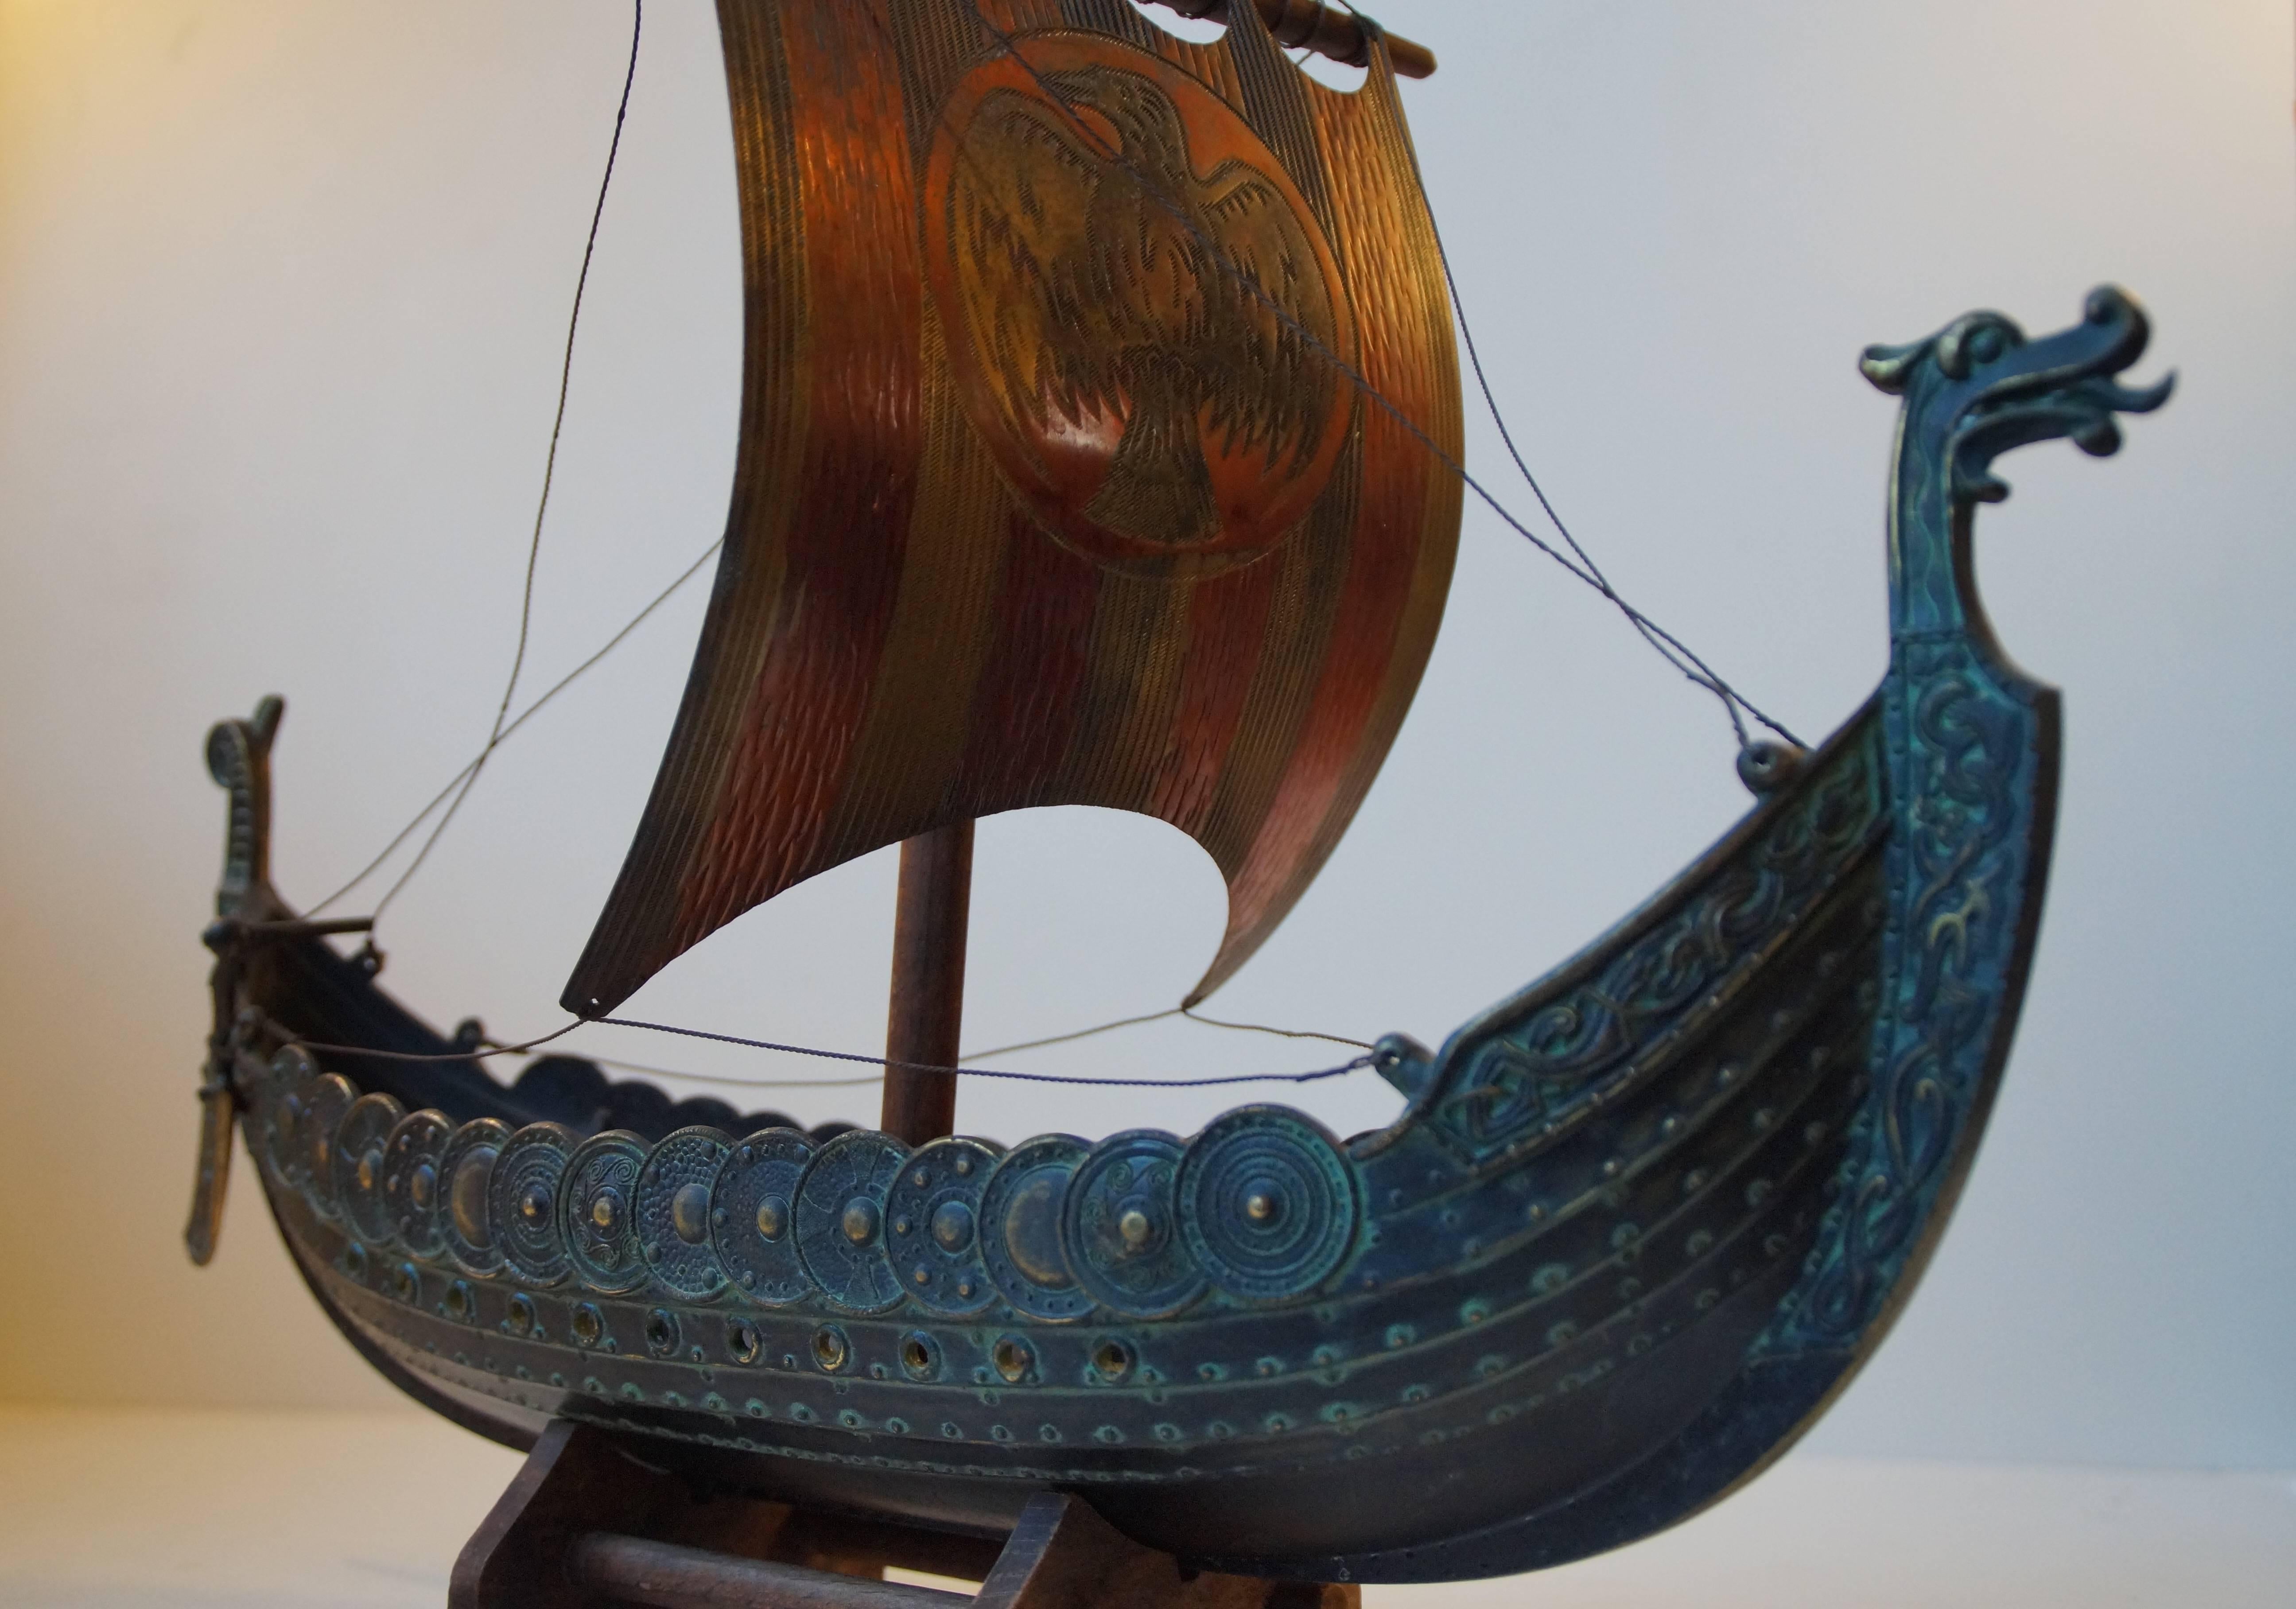 Beautifully crafted and detailed model of Viking Ship in patinated bronze by Edward Aagaard for Copenhagen Iron Art. Intact and complete condition and with a small wooden stand for display in your office or gents room. Stamped: Copenhagen Iron Art